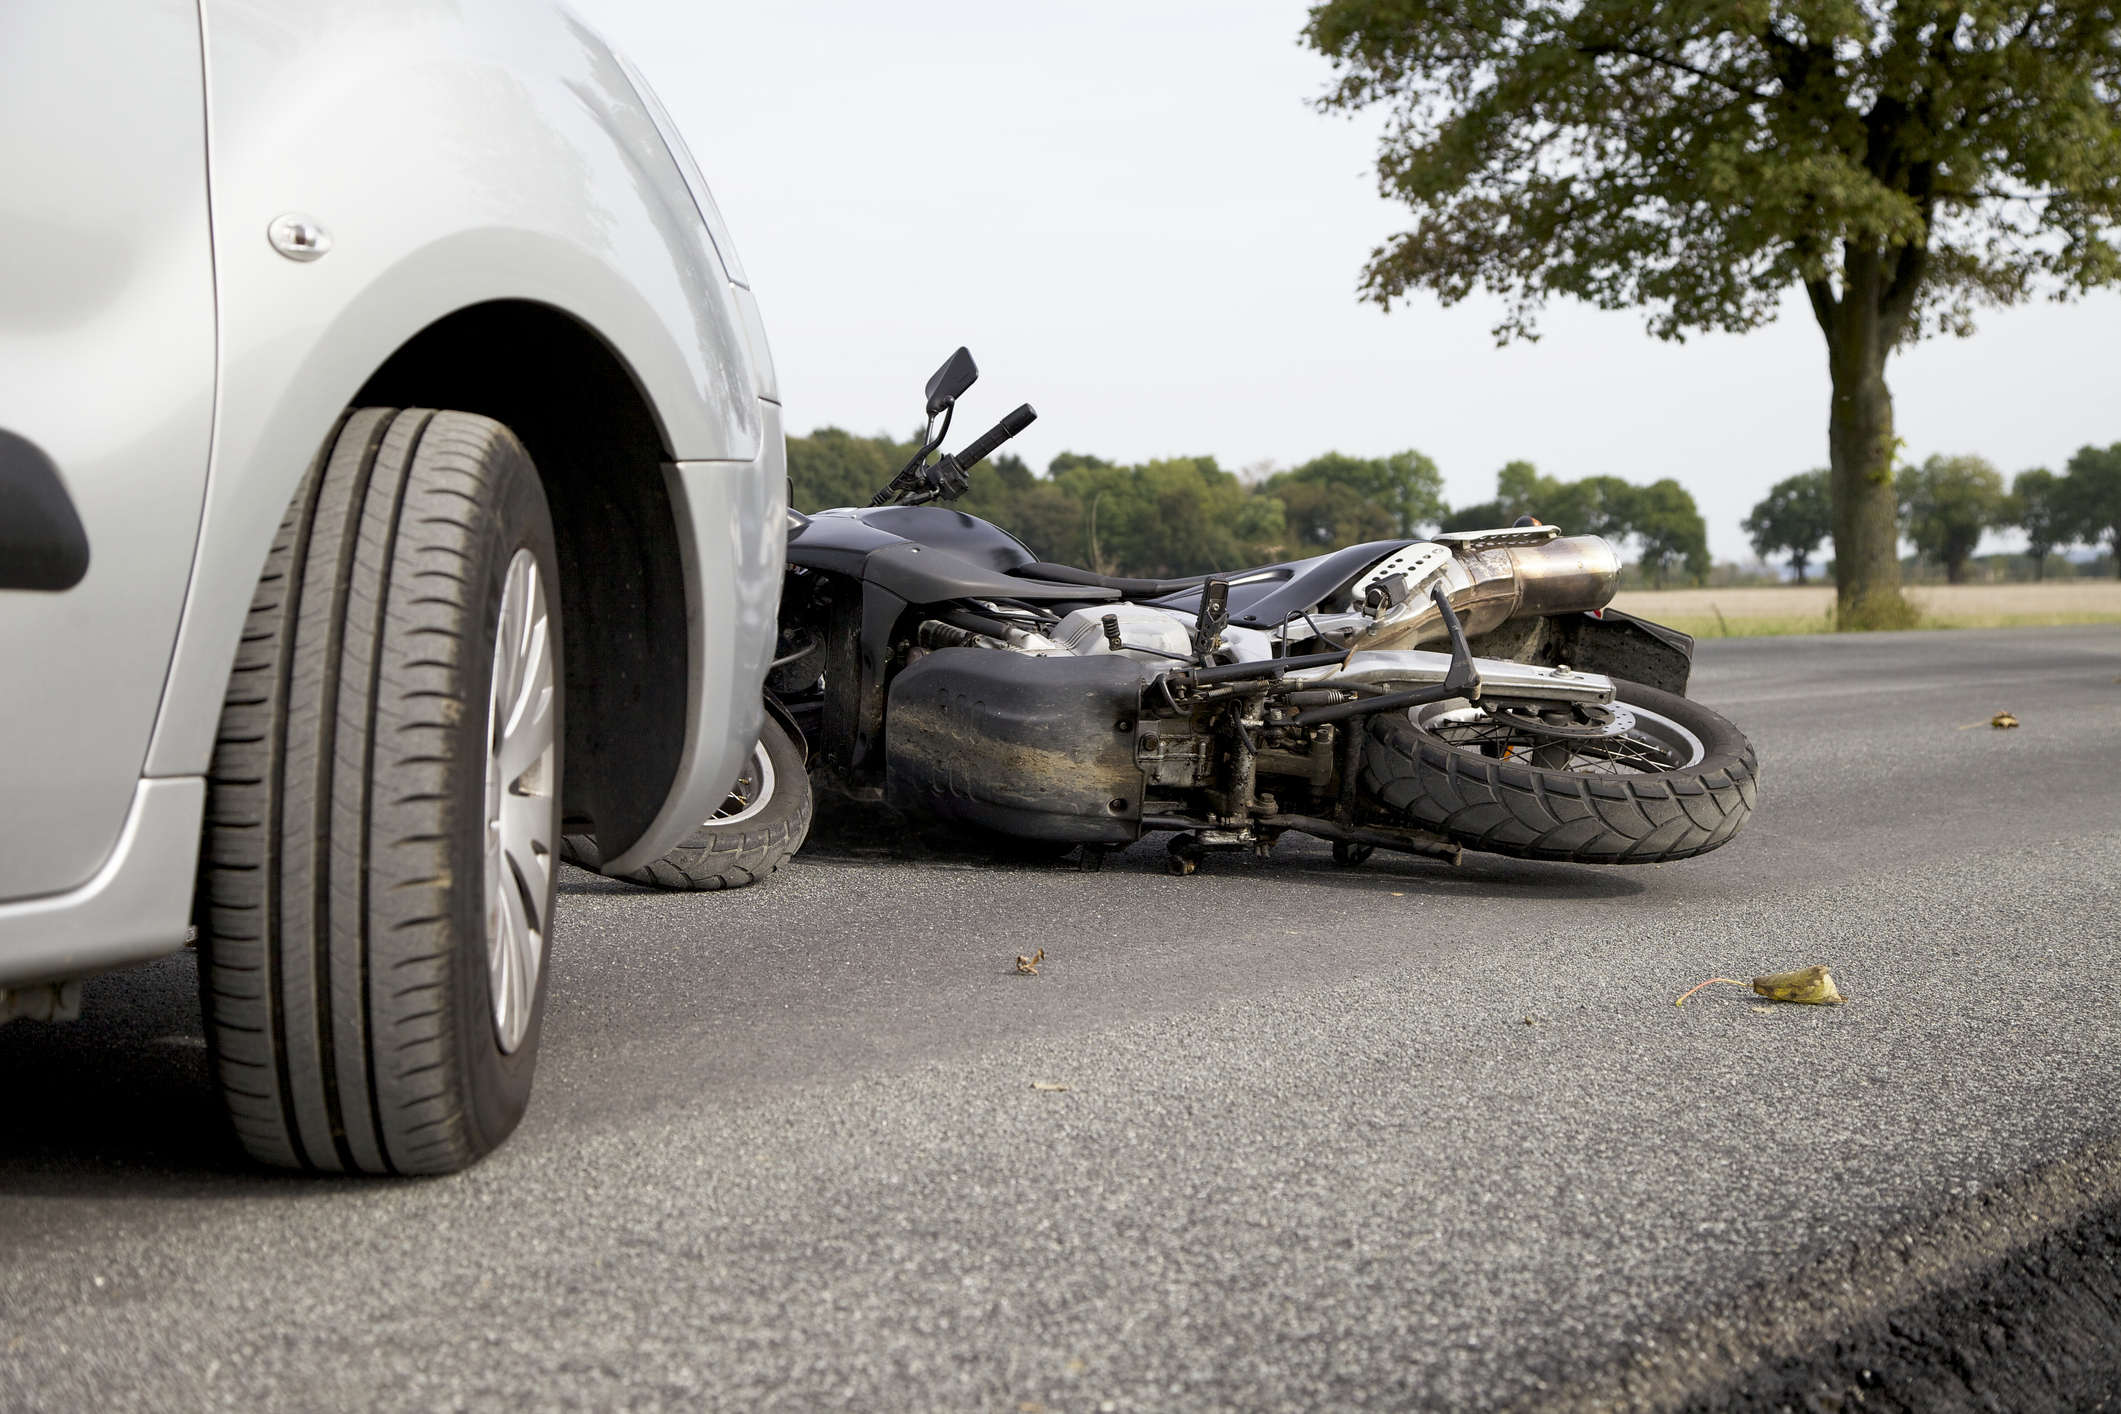 How do you speak with an insurance firm about your motorbike accident?